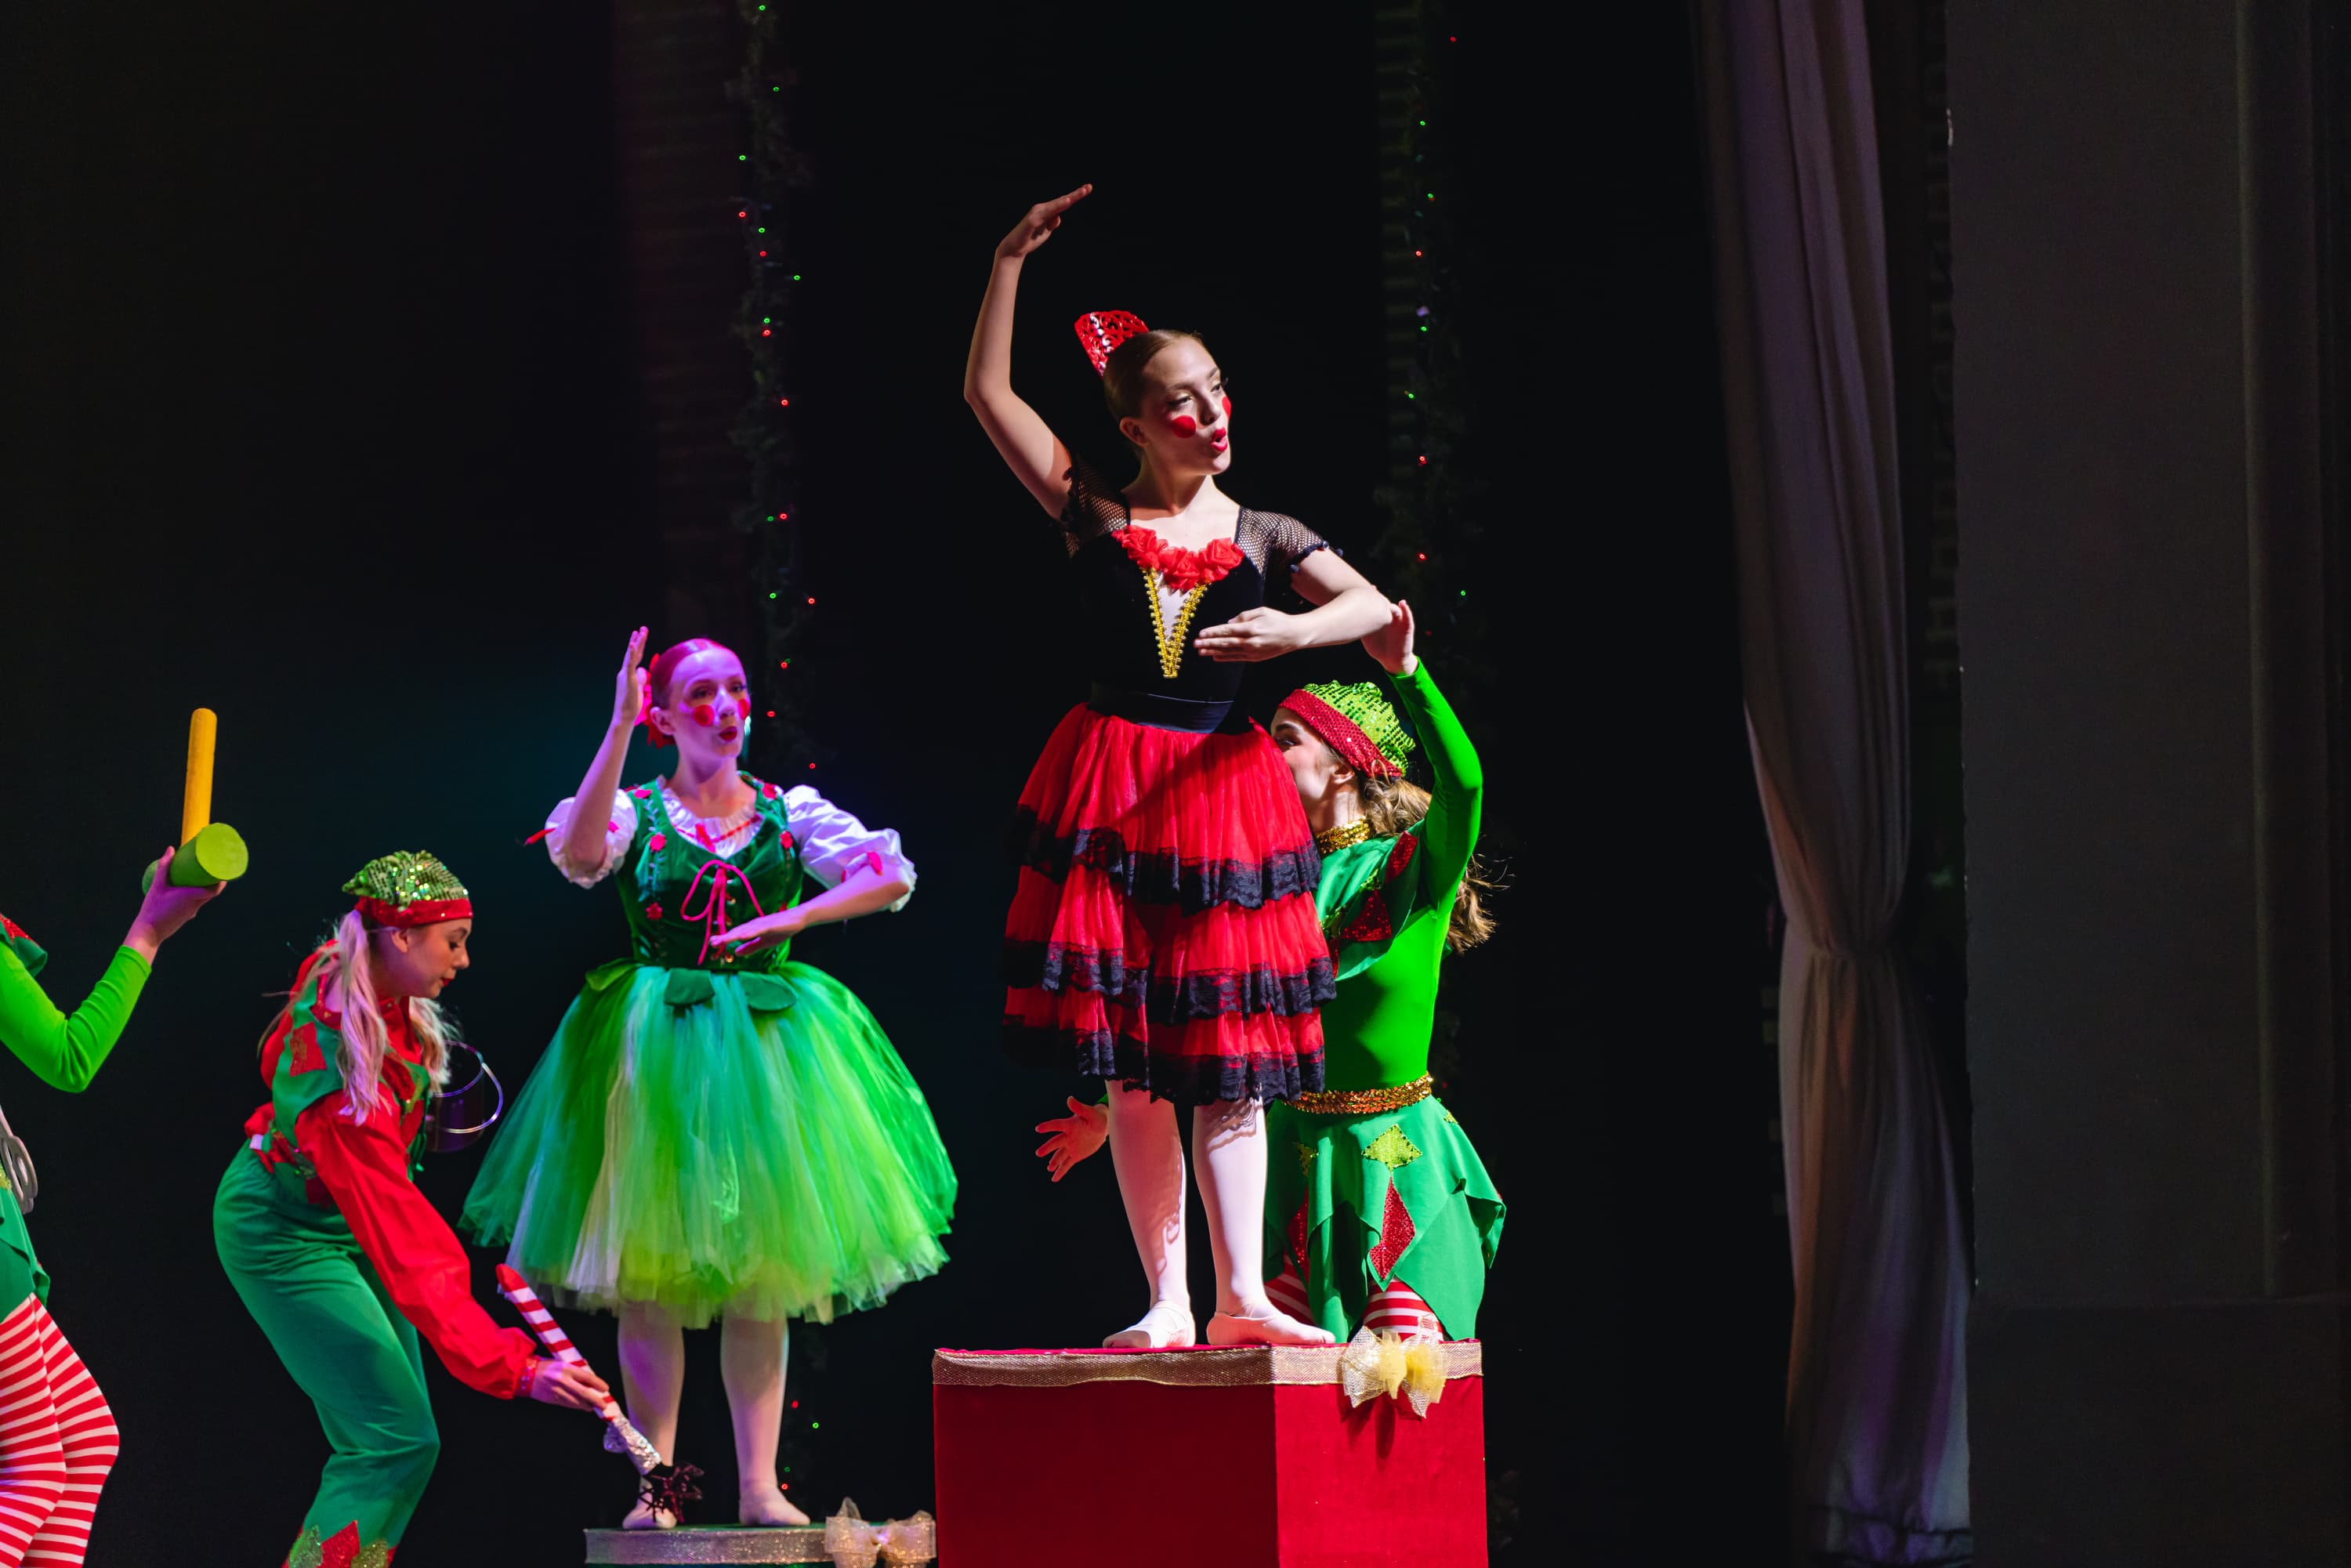 Oklahoma City University students dance together in the Holiday Spectacular dance presentation.